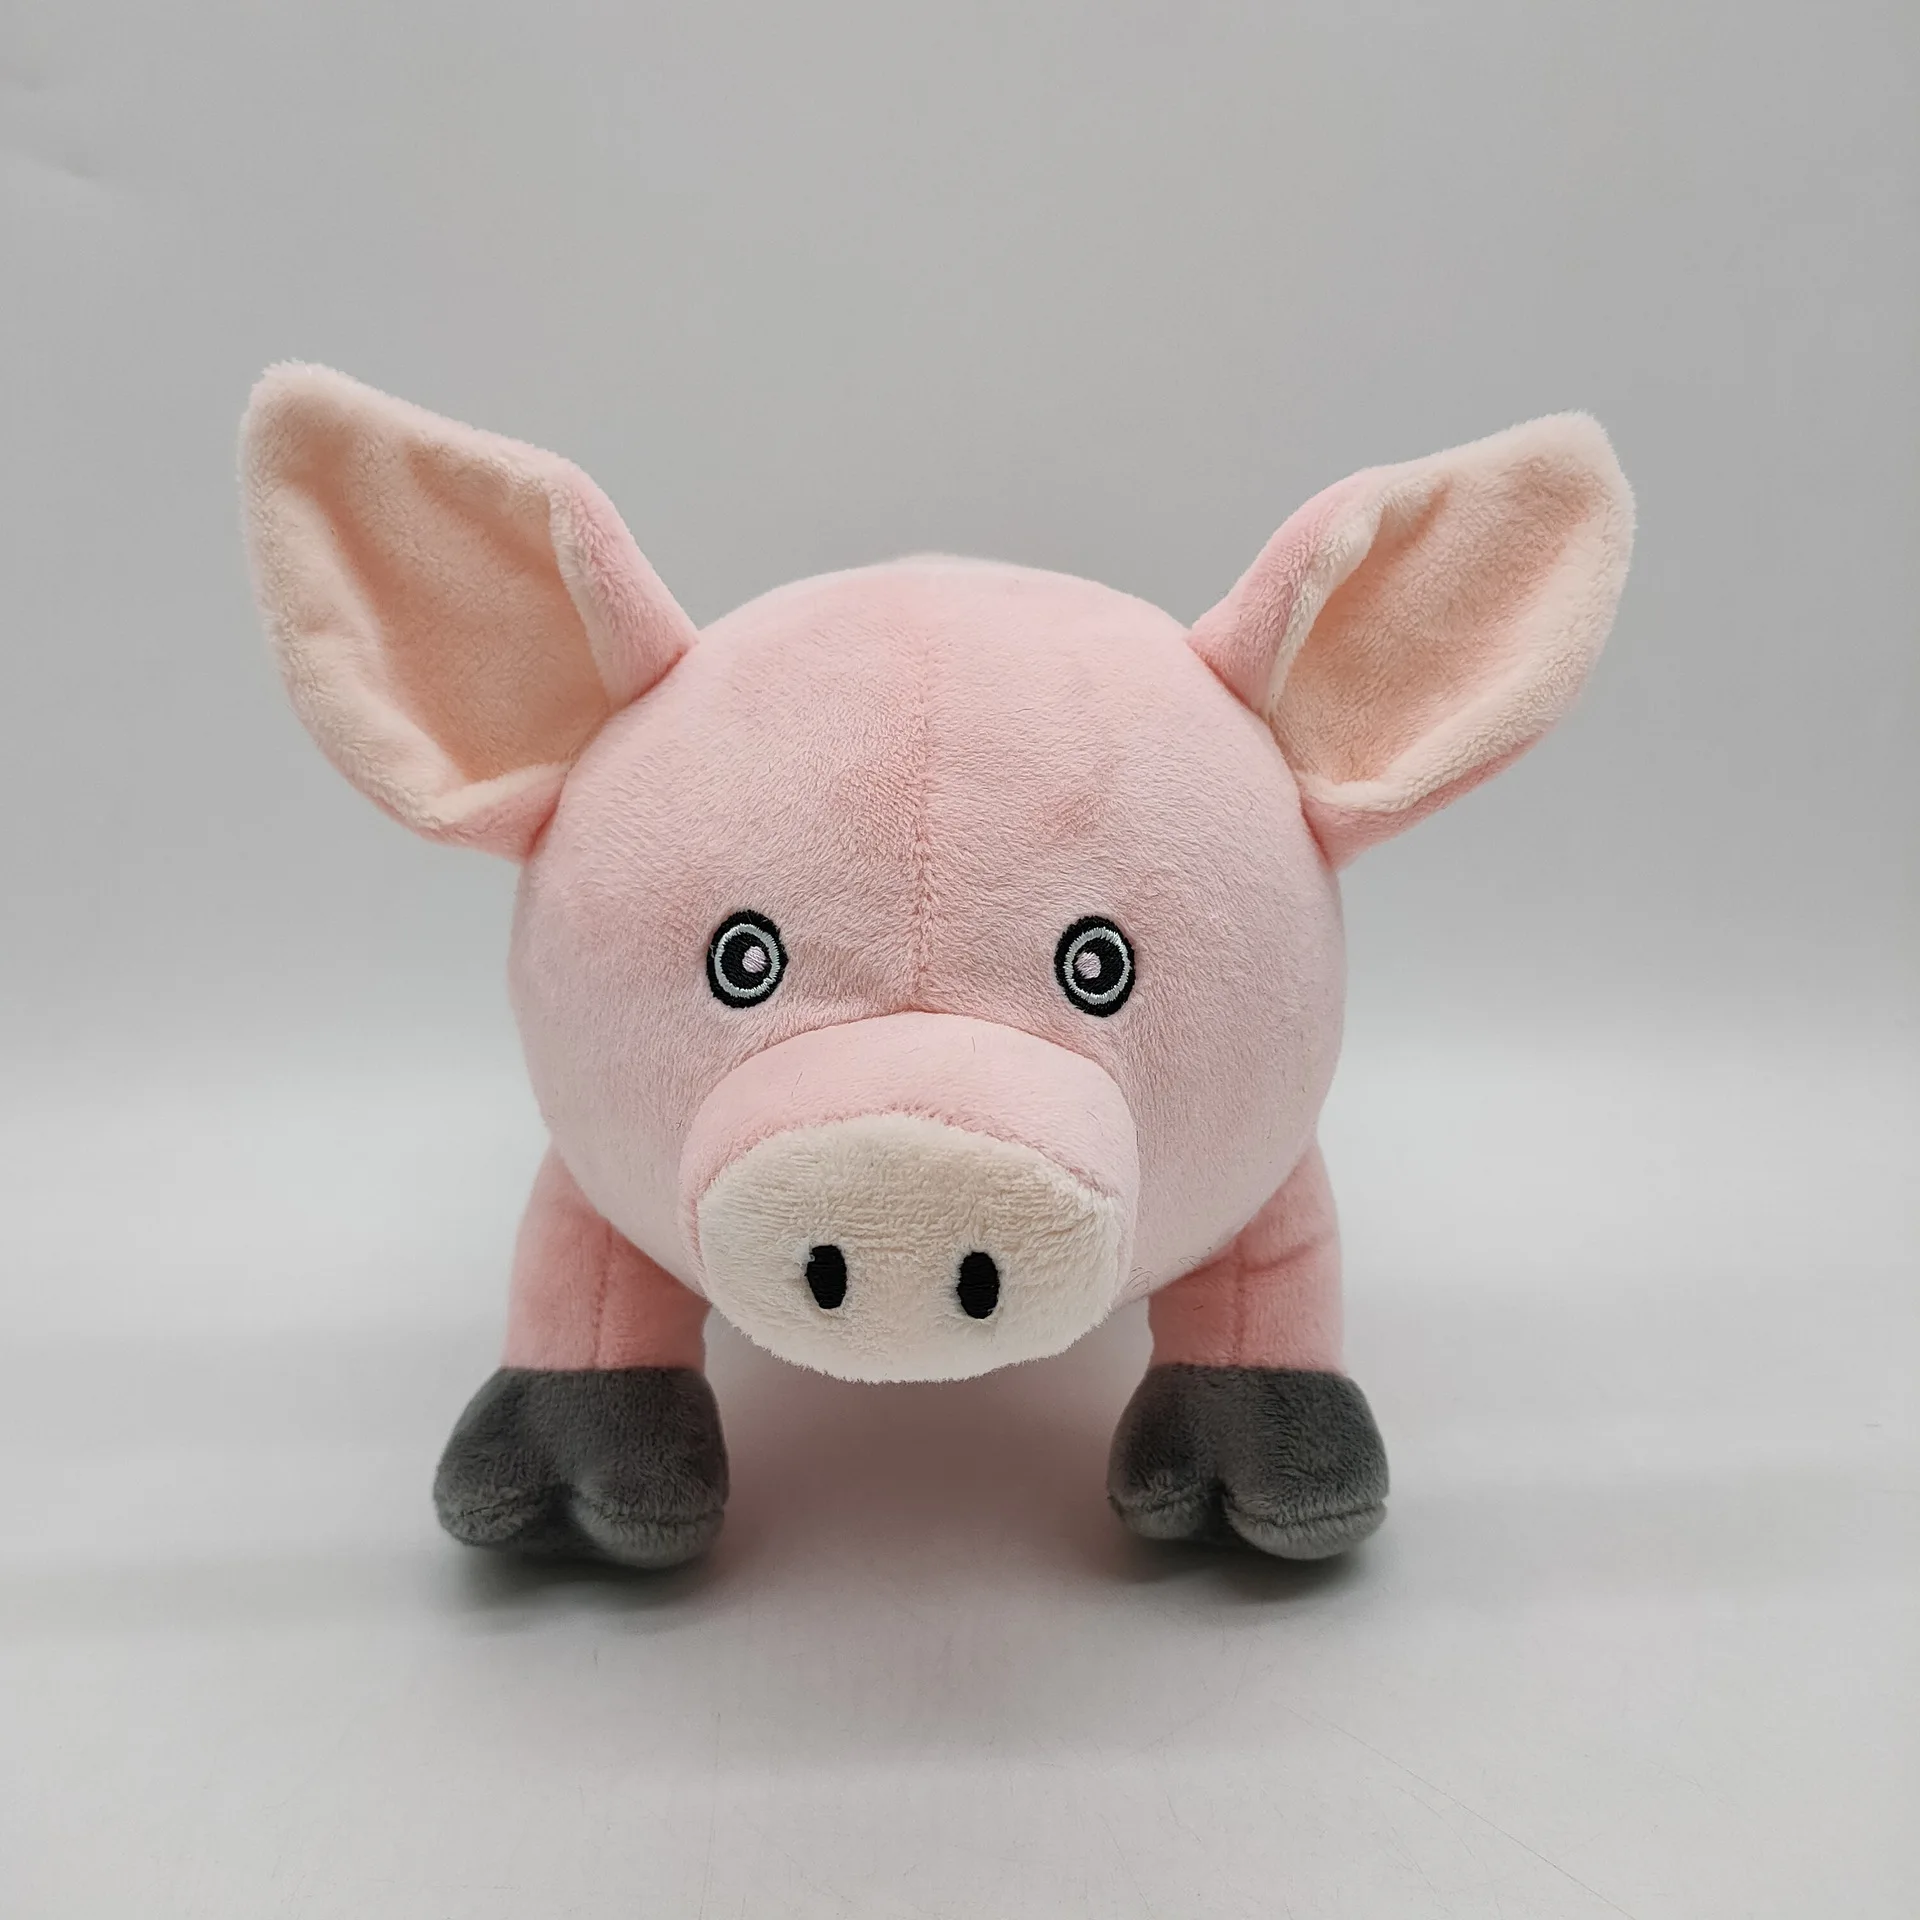 

20CM New Slumberland Pig Pink Plush Toys Around Pigs Holiday Gifts for Boys and Girls Birthday Gifts Home Decoration